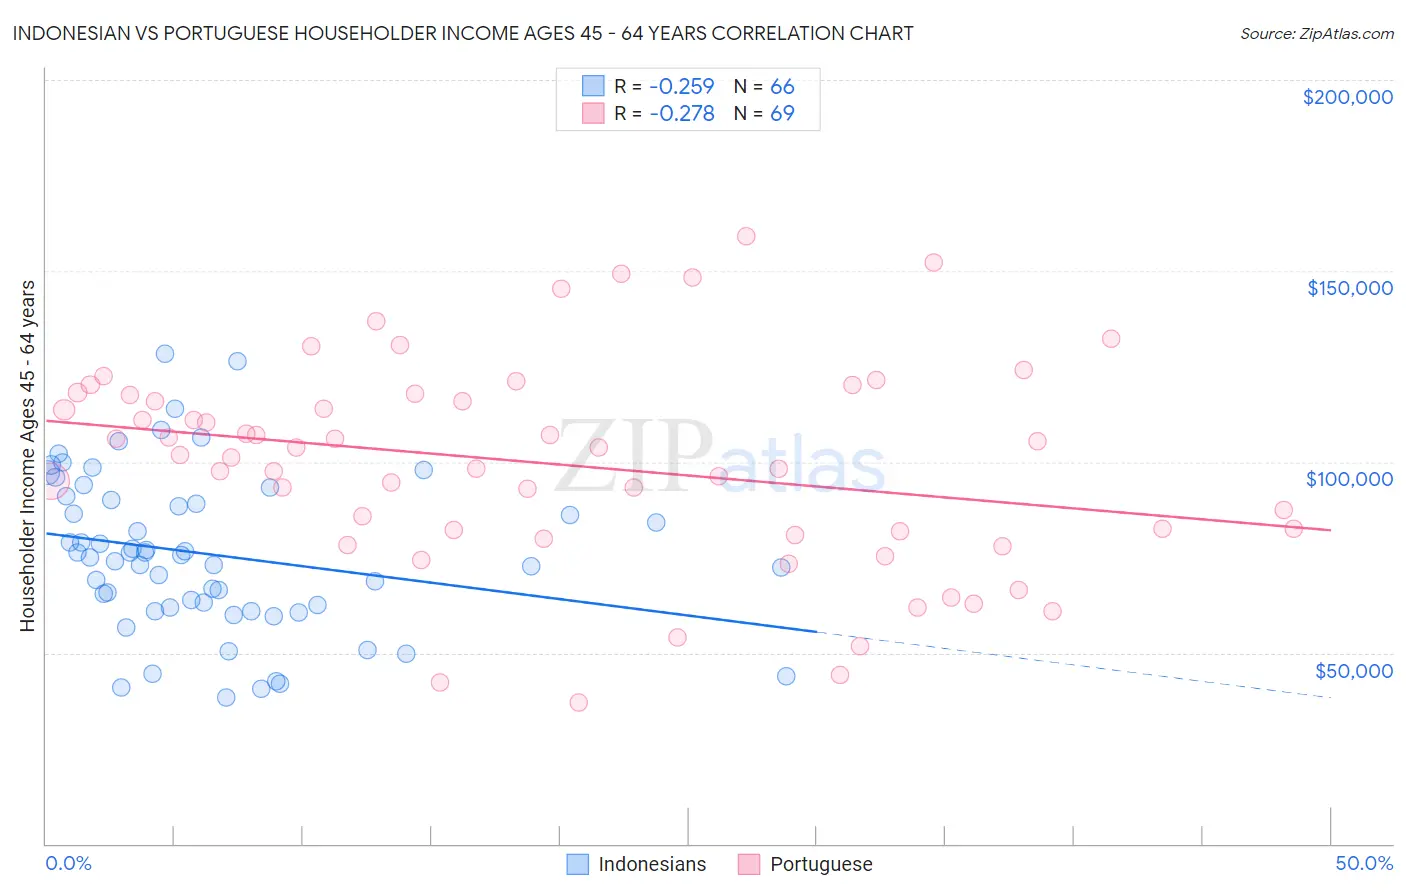 Indonesian vs Portuguese Householder Income Ages 45 - 64 years